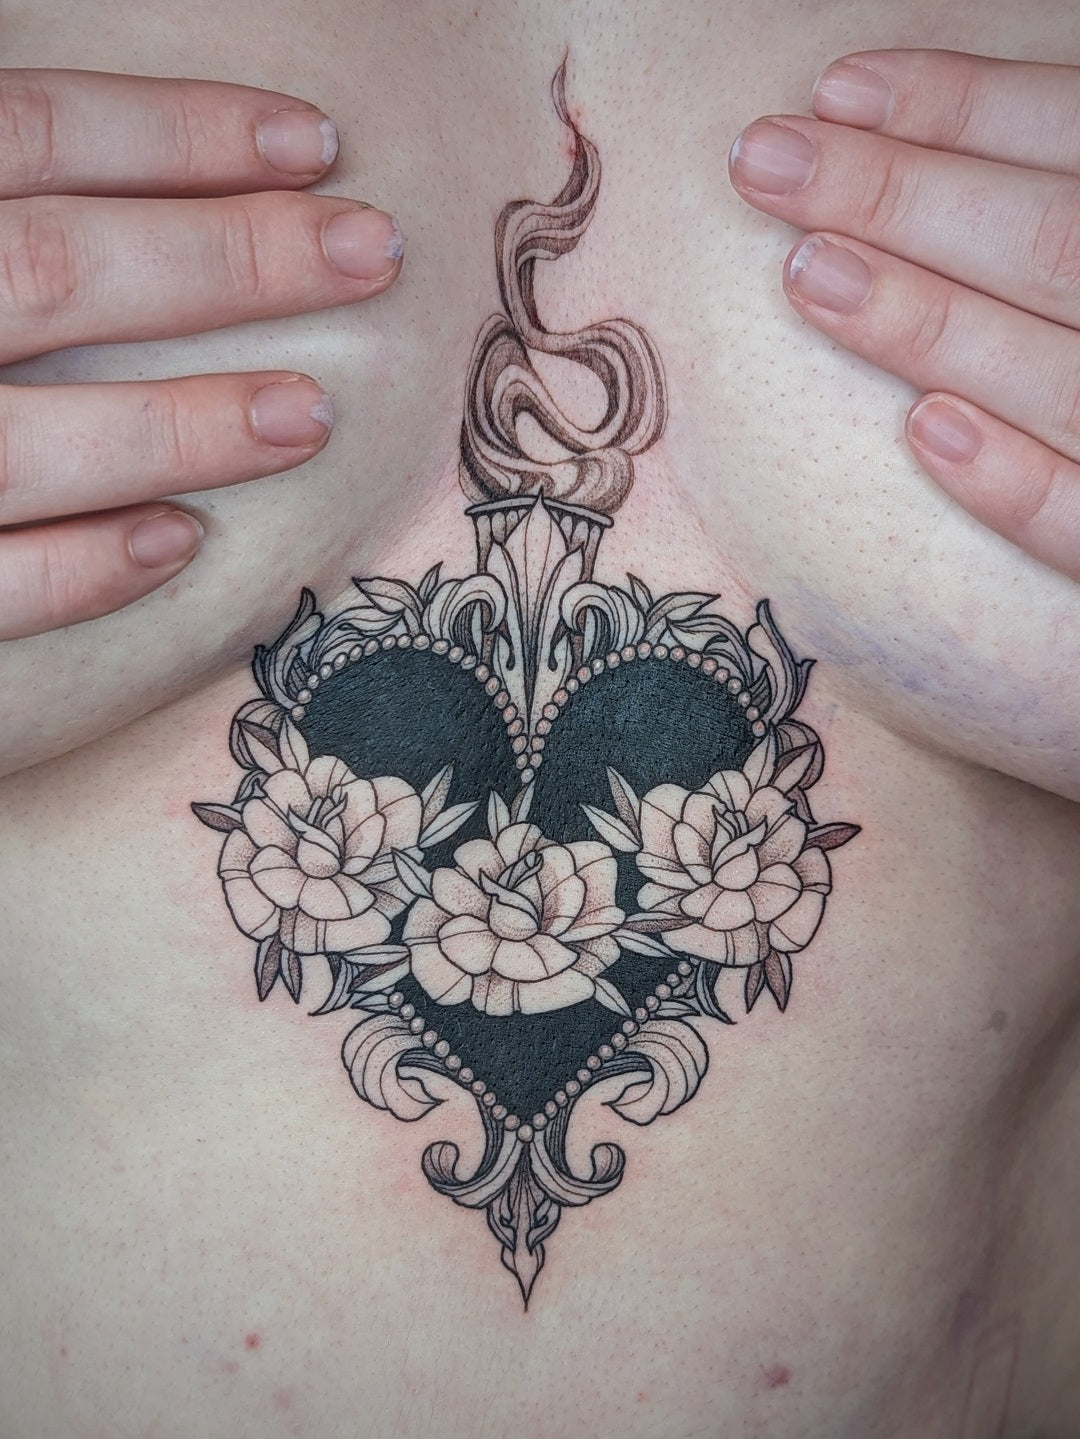 Everything You Need To Know About Getting An Underboob Tattoo